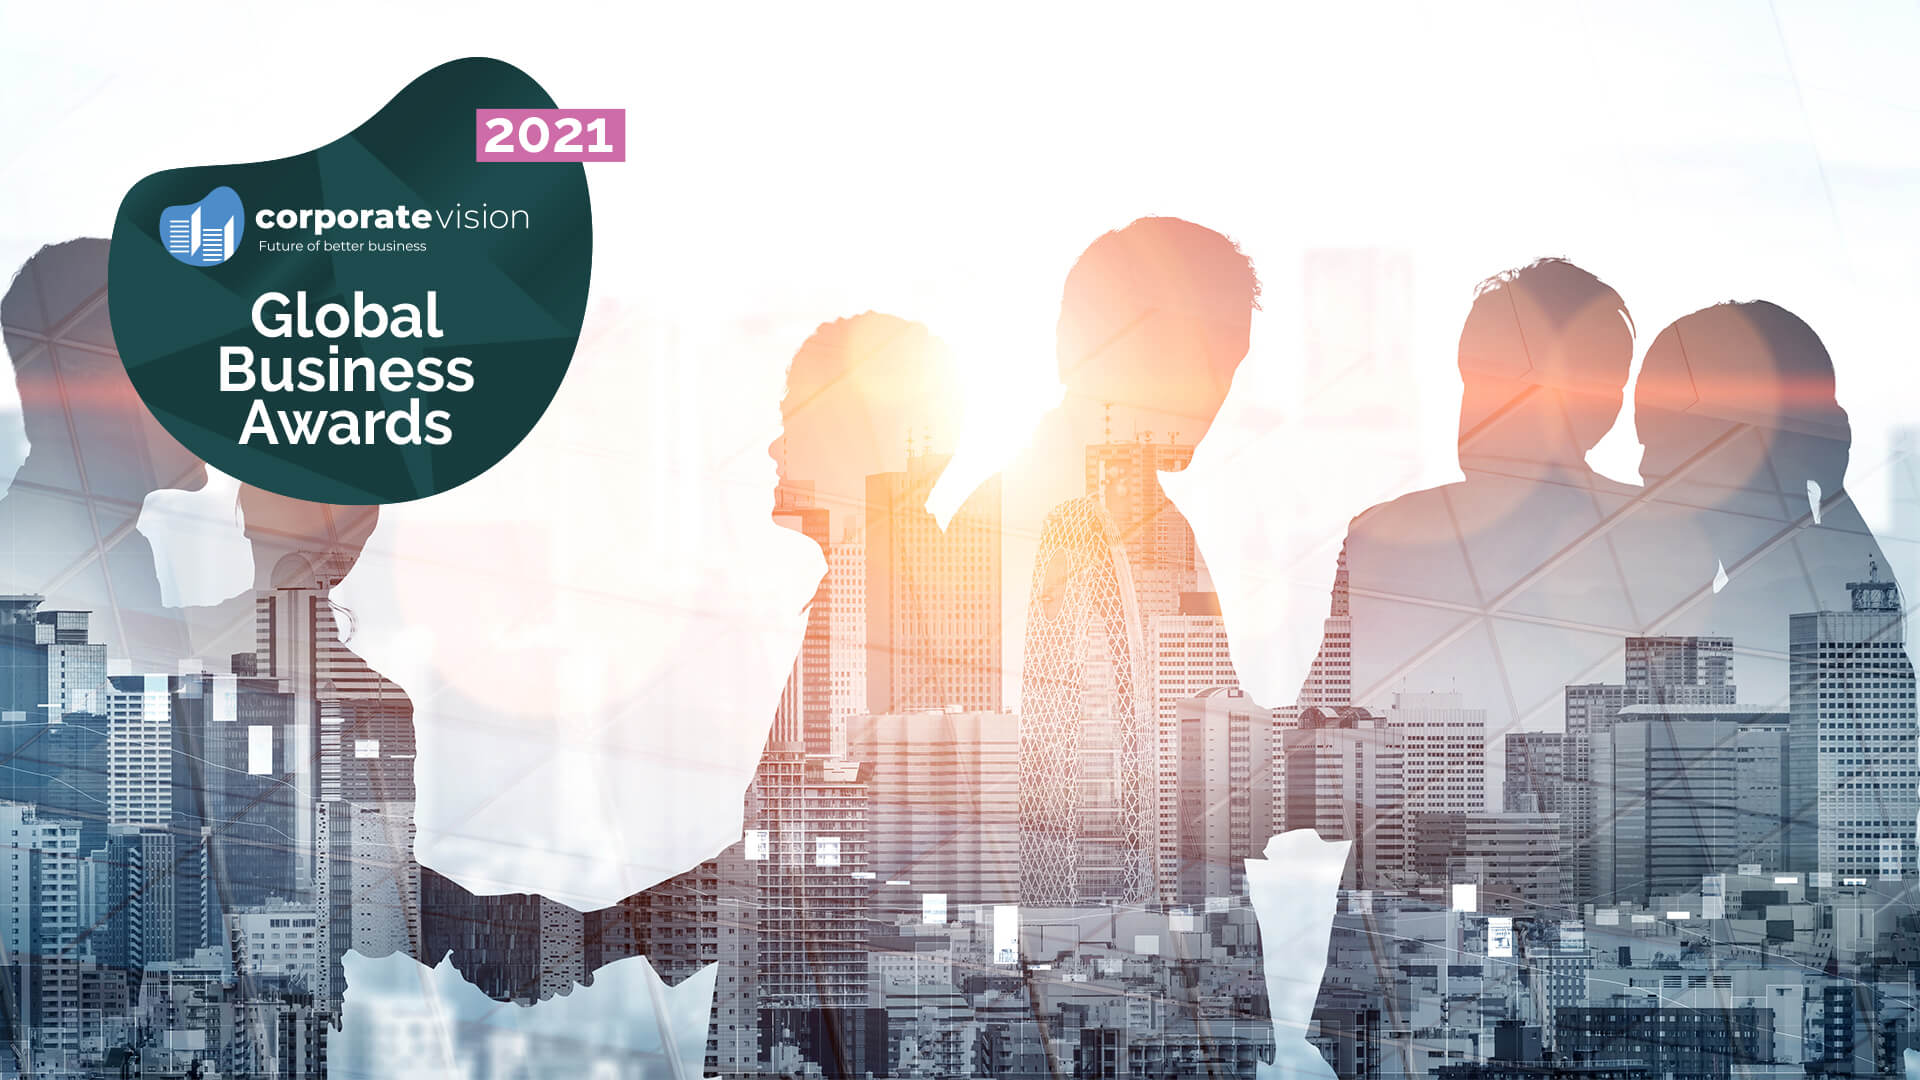 Silhouette of business people shaking hands, with a double exposure of a city skyline in the silhouette